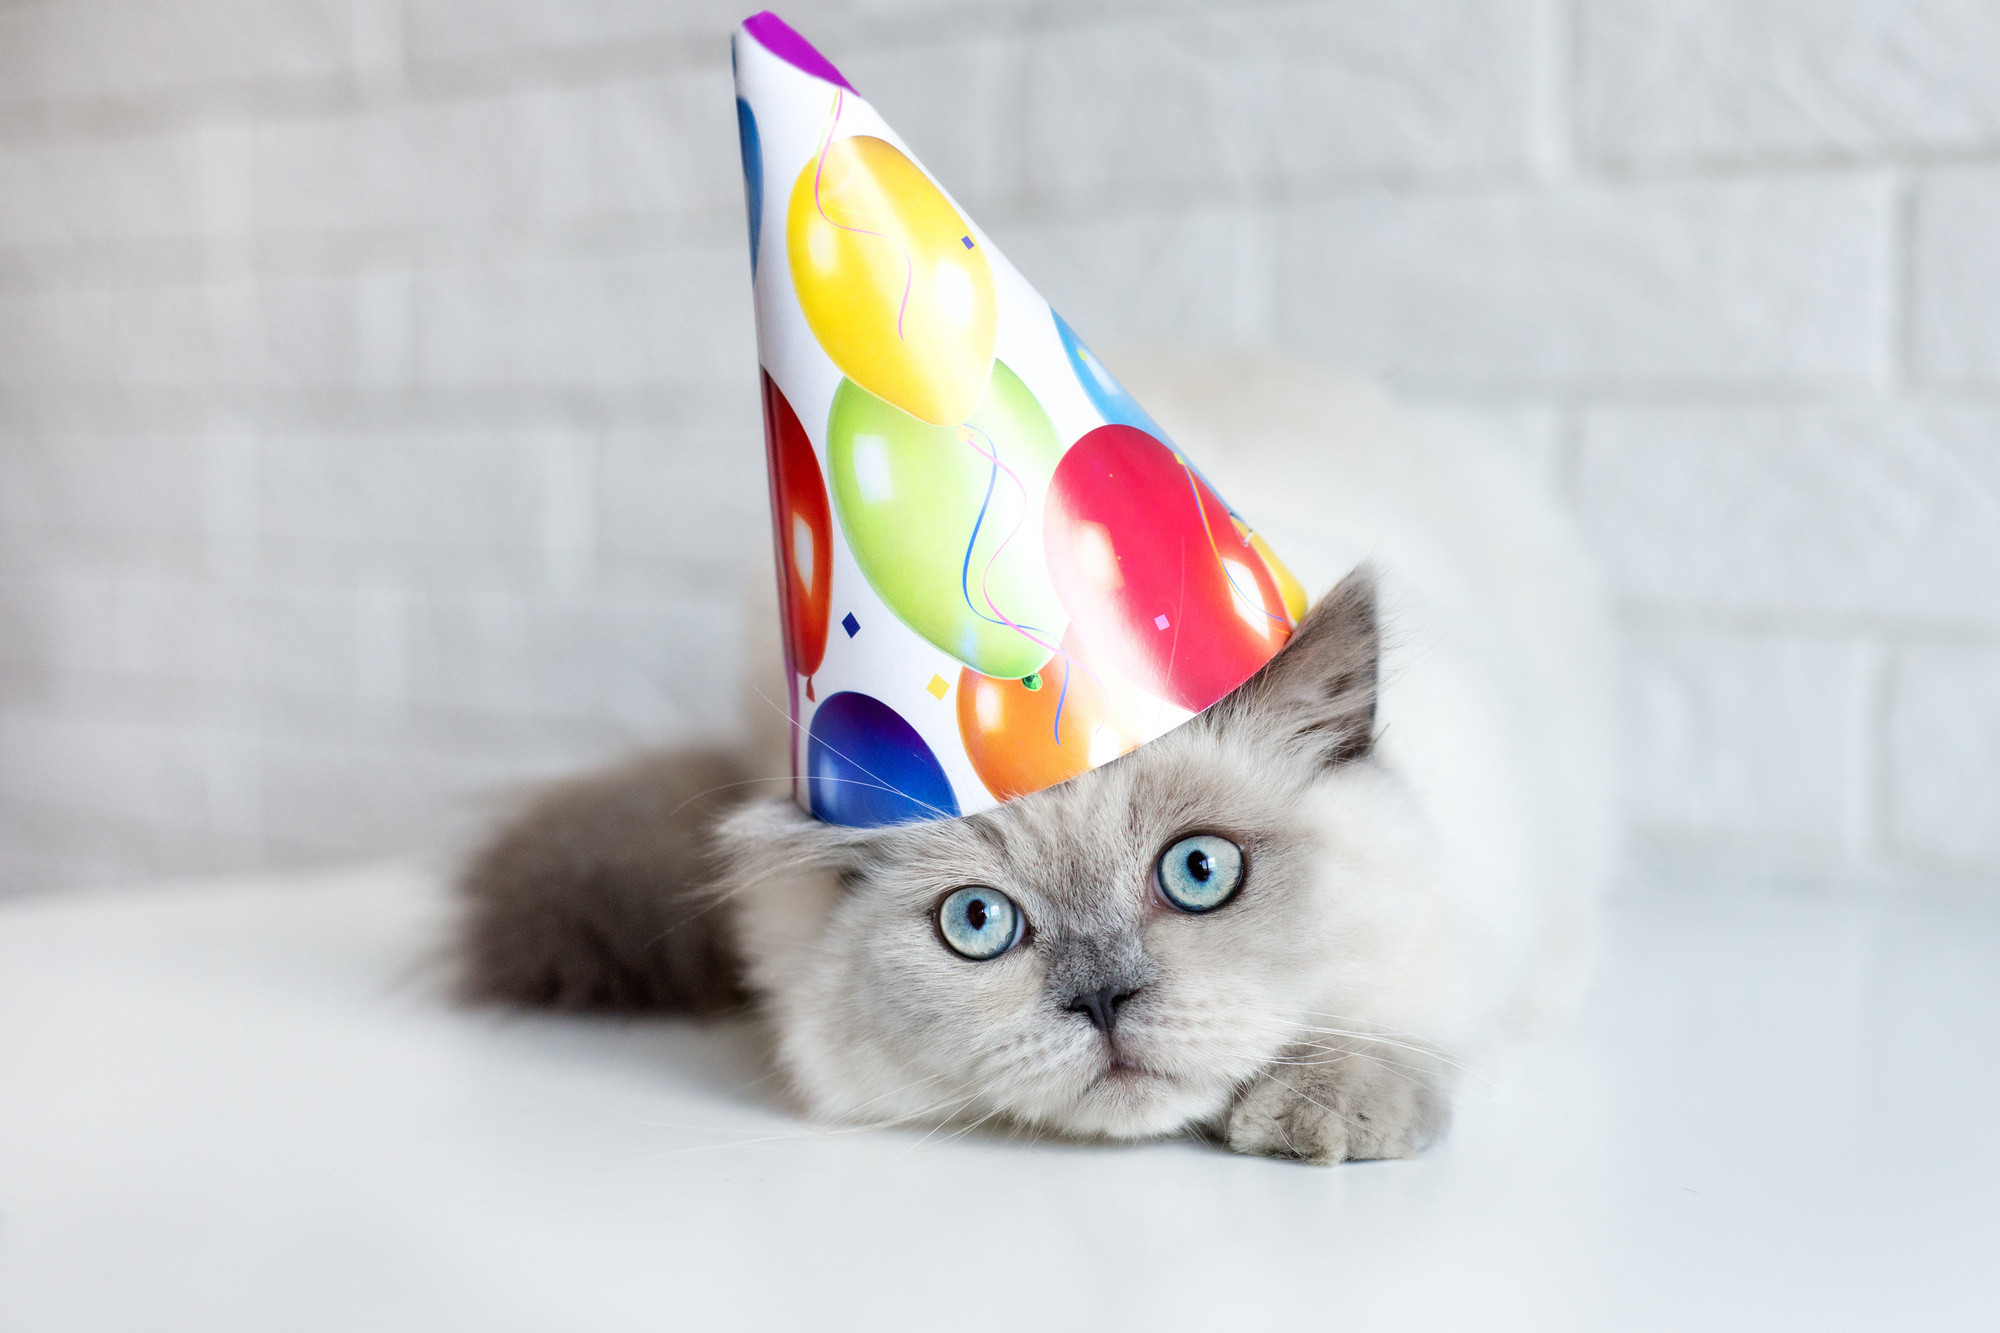 Kitten Birthday Party
 10 Cute Ideas for a Cat Themed Birthday Party Birthday